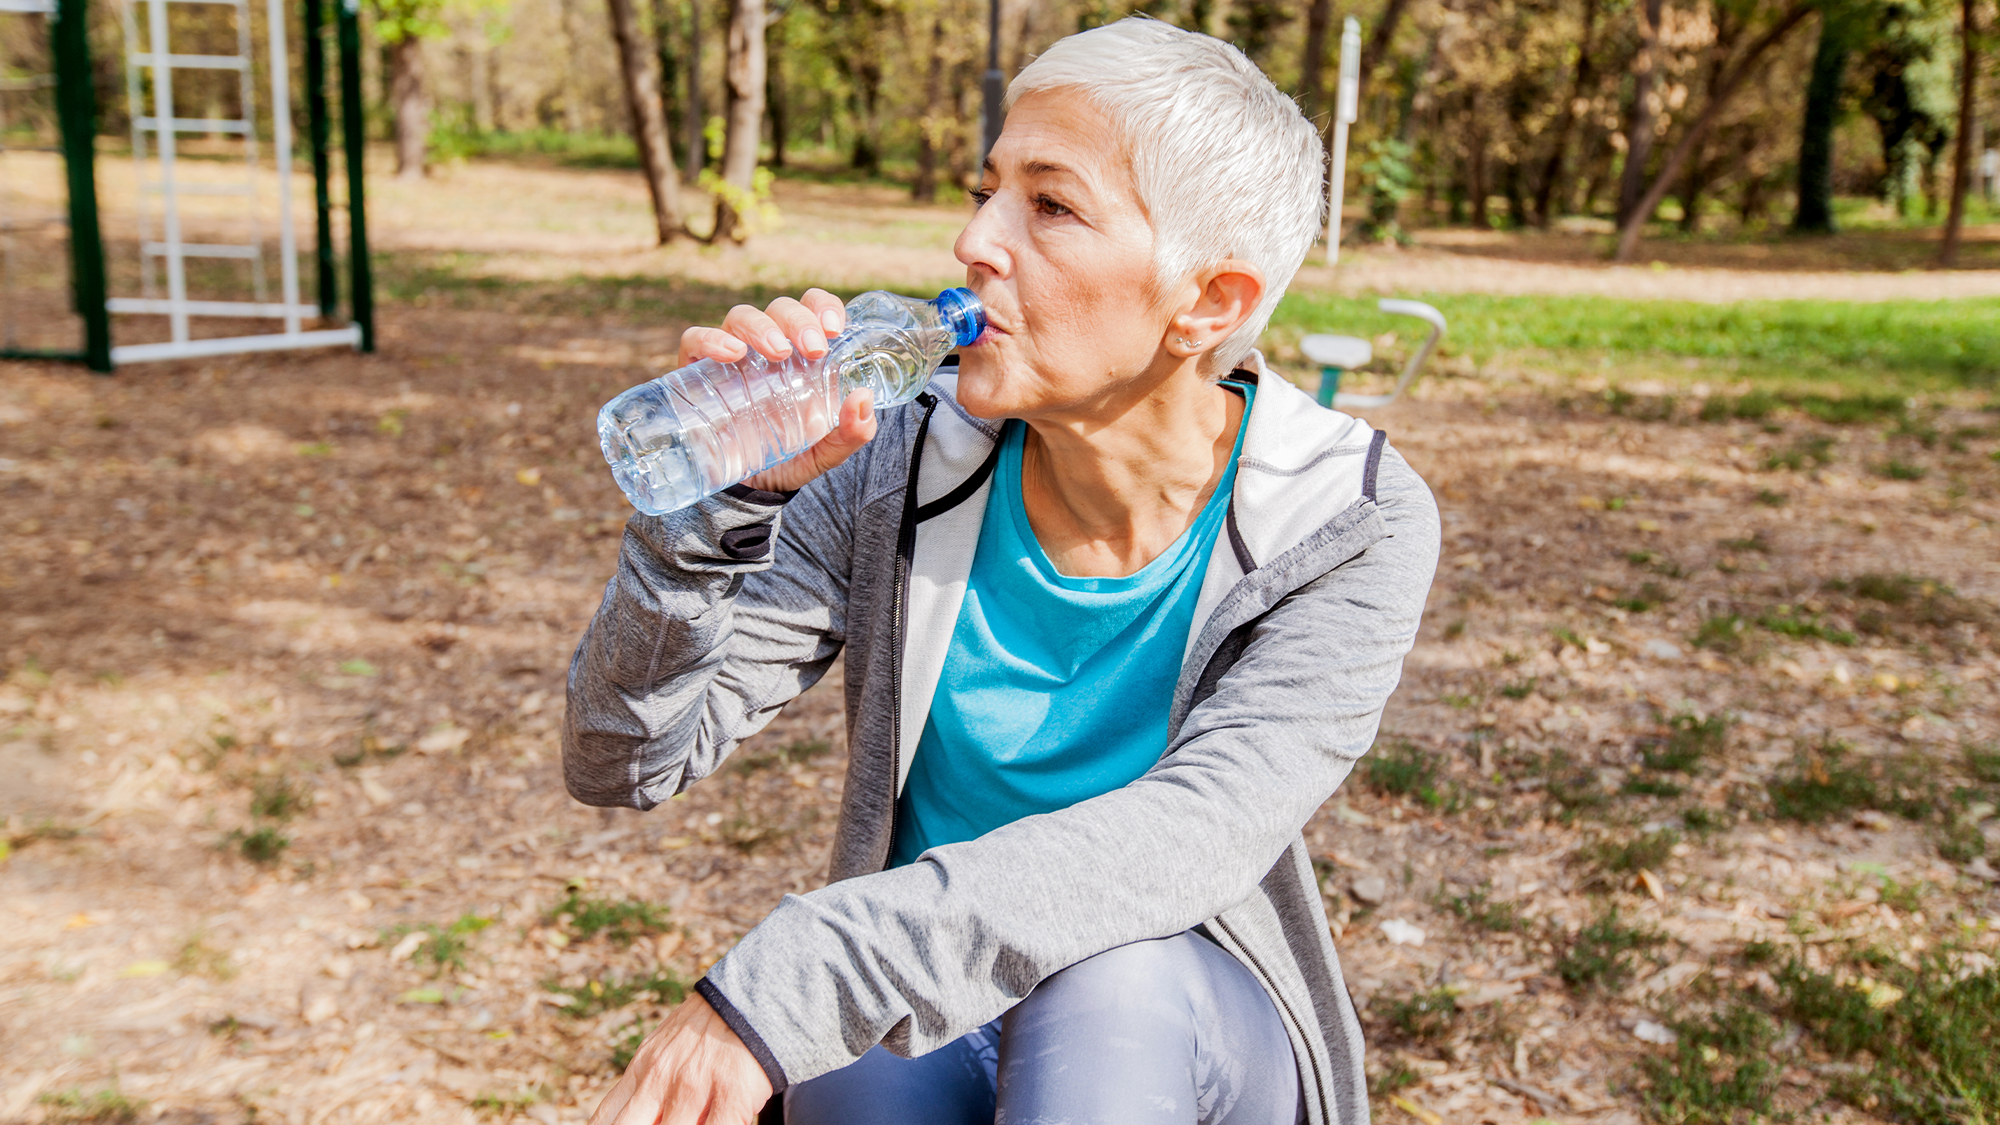 Hydration seems to be the key to aging better and living longer